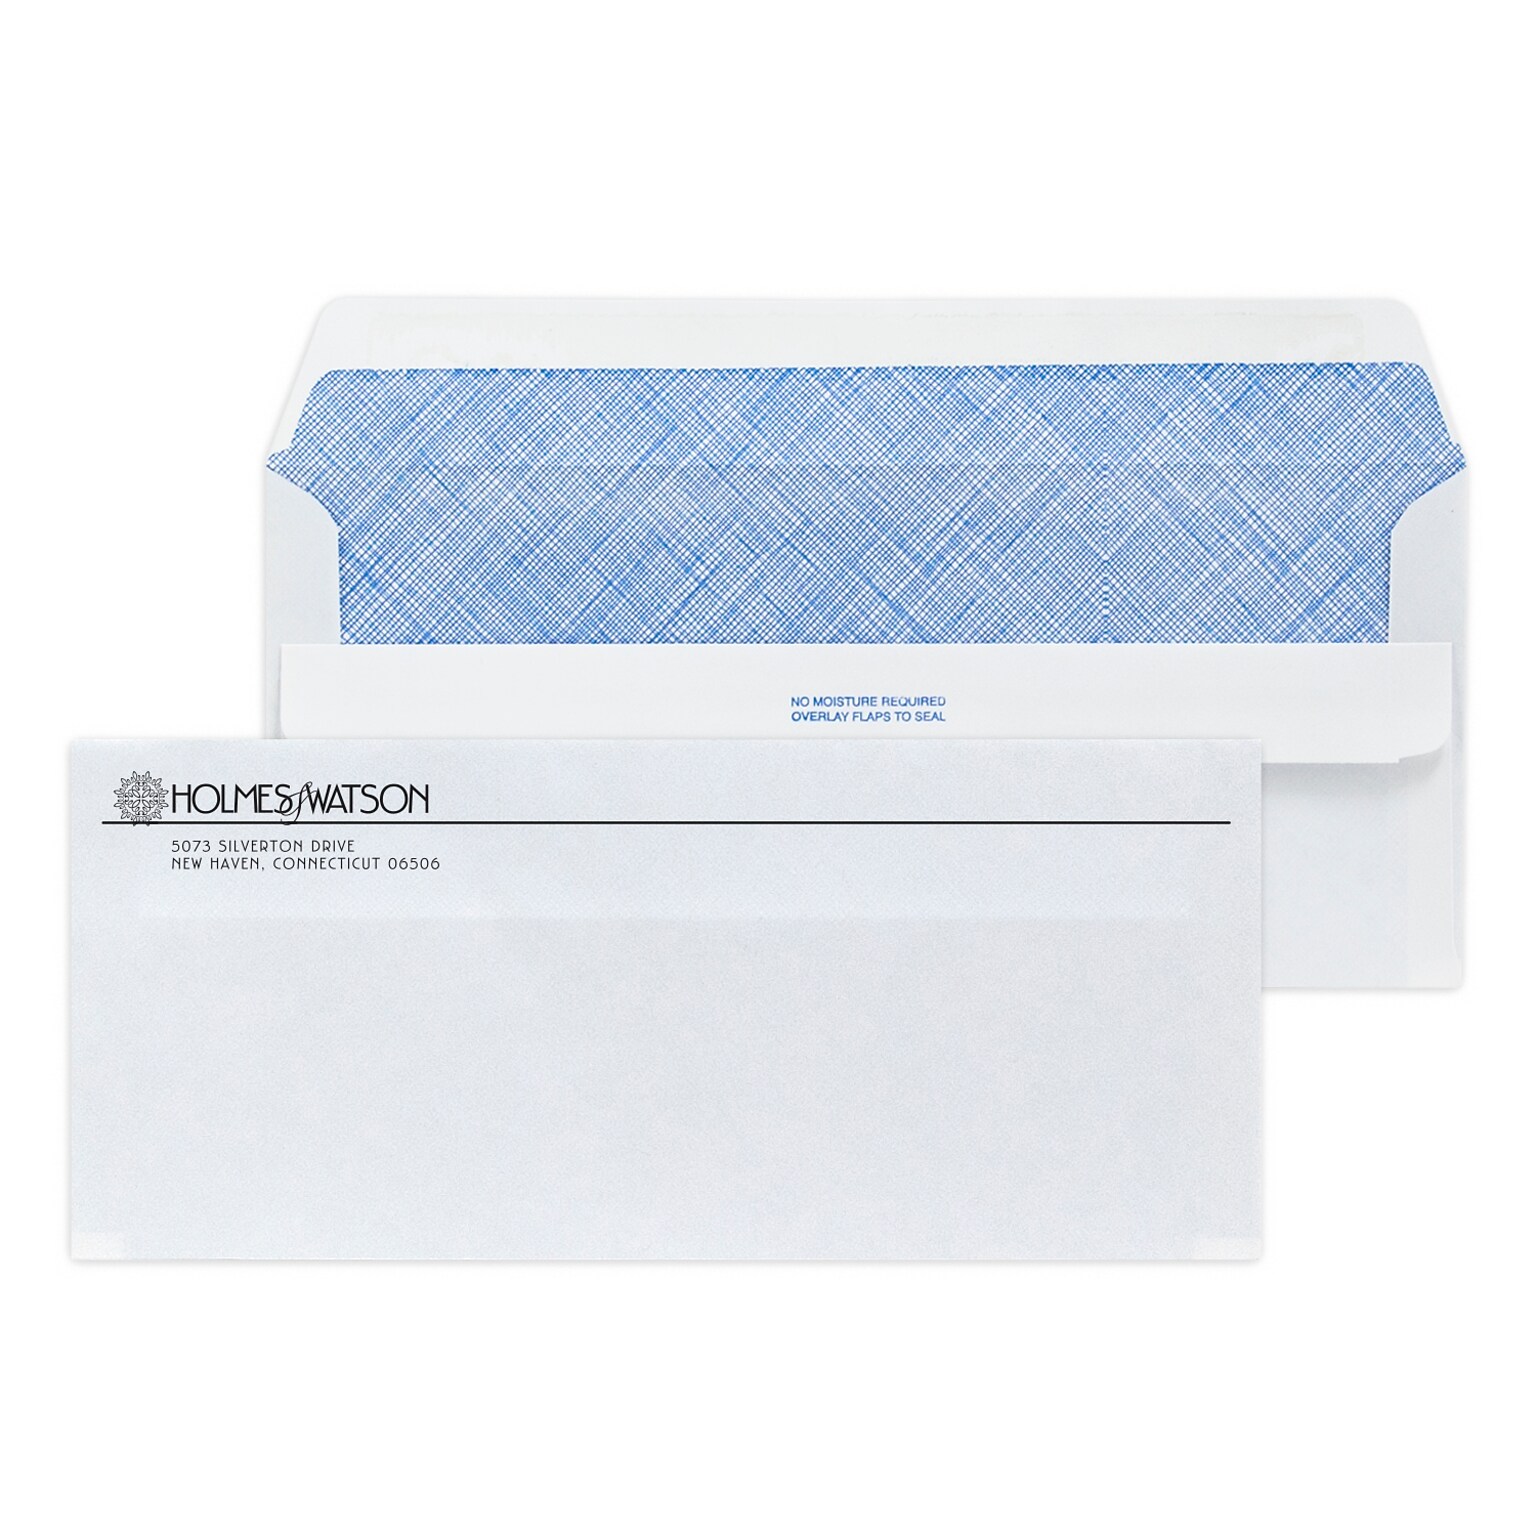 Custom #10 Barcode Self Seal Envelopes with Security Tint, 4 1/4 x 9 1/2, 24# White Wove, 1 Standard Ink, 250 / Pack